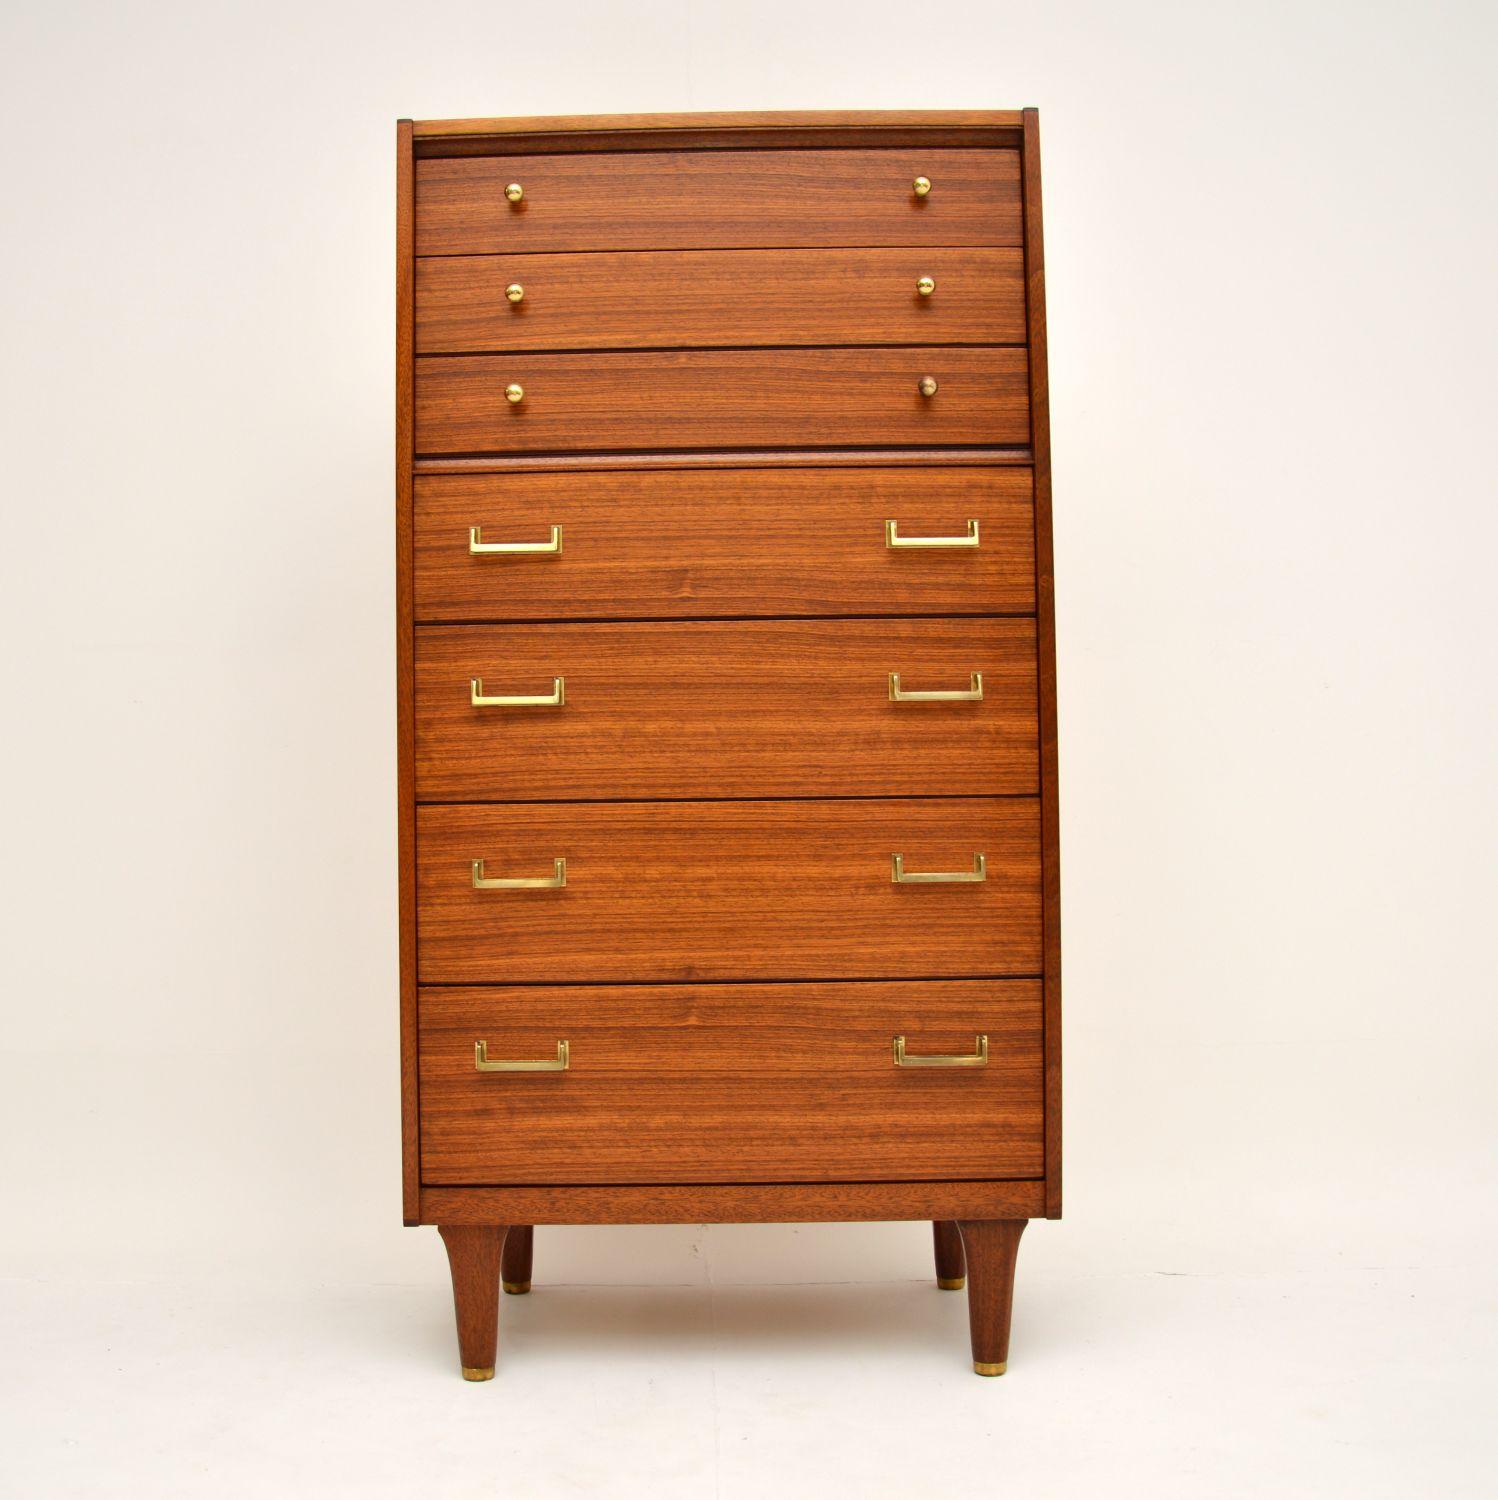 A stunning vintage tallboy chest of drawers in walnut. This was made in England by G- Plan, it dates from the 1960’s.

This is a rare model of exceptional quality, it has stunning walnut grain patterns throughout. The handles and feet caps are